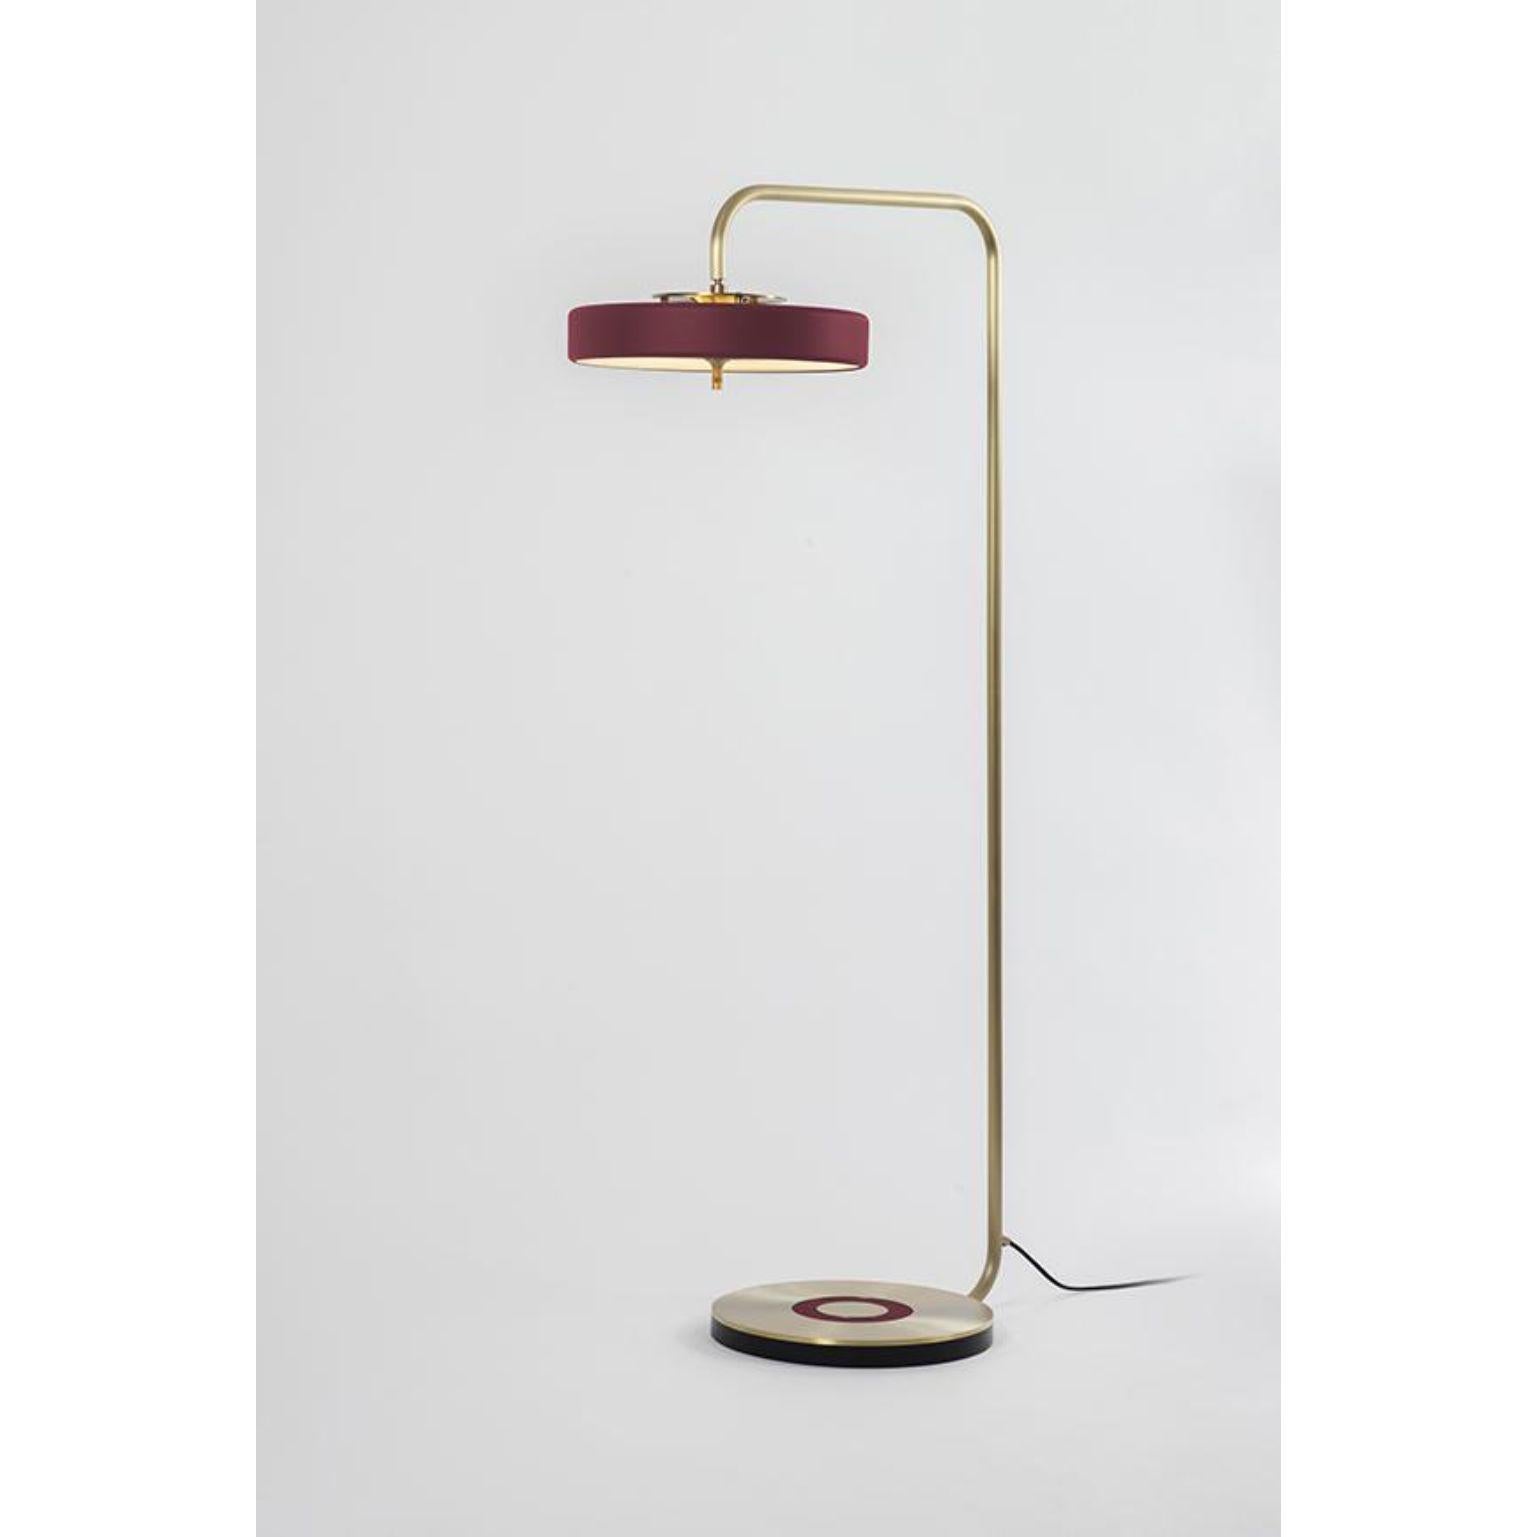 Revolve floor lamp - Brushed brass - Oxblood by Bert Frank
Dimensions: 130 x 35.4 x 9.3 cm
Materials: Brass, steel

Also available in polished brass
When Adam Yeats and Robbie Llewellyn founded Bert Frank in 2013 it was a meeting of minds and